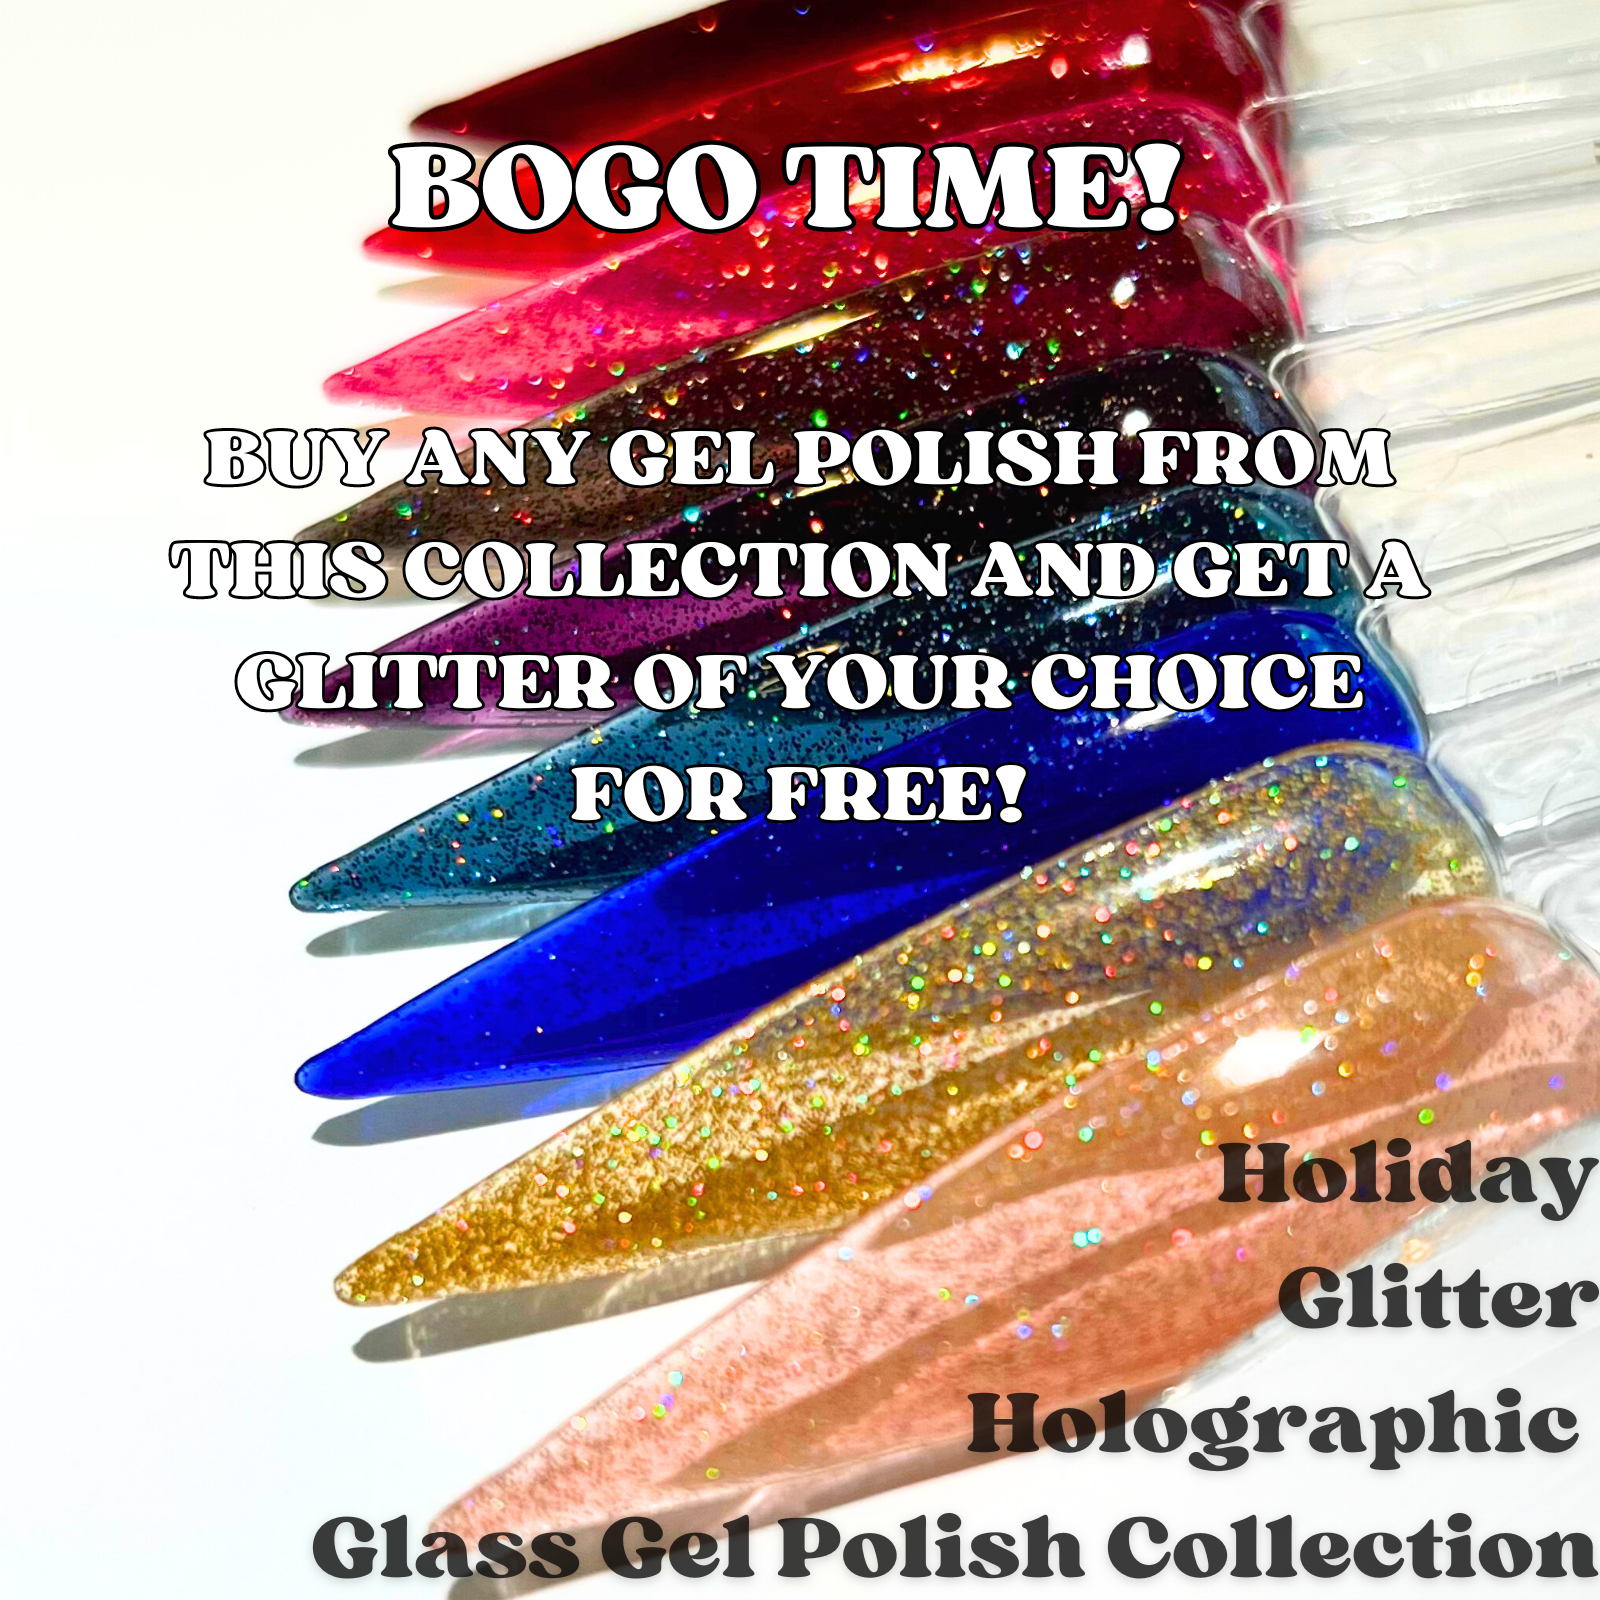 Holiday Glitter Holographic Glass Polish Collection